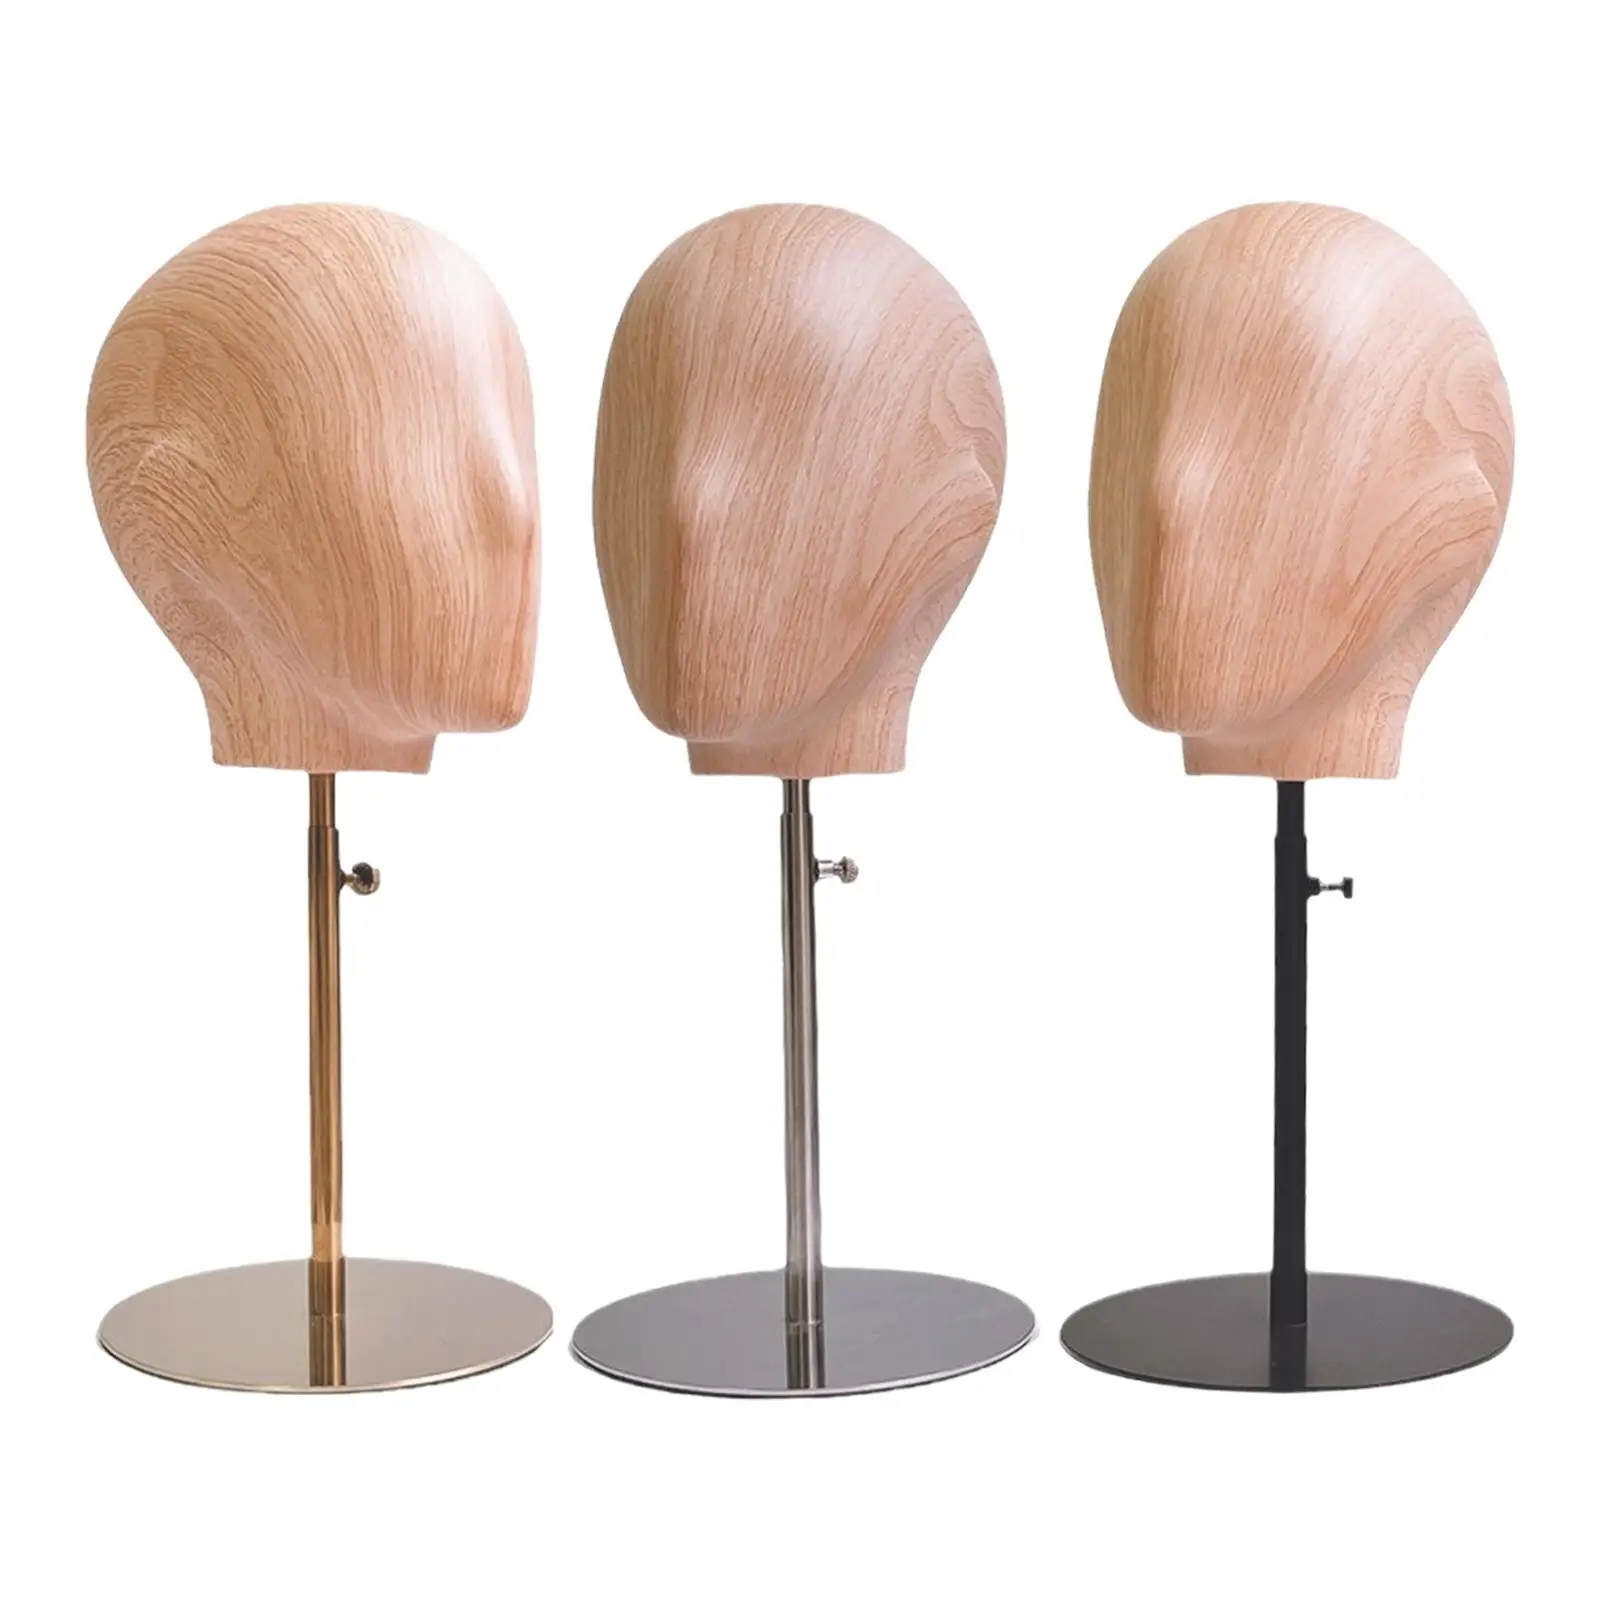 wig-display-stand-mannequin-head-block-professional-wig-holder-making-styling-for-beauty-salon-hats-earrings-hair-salon-shop